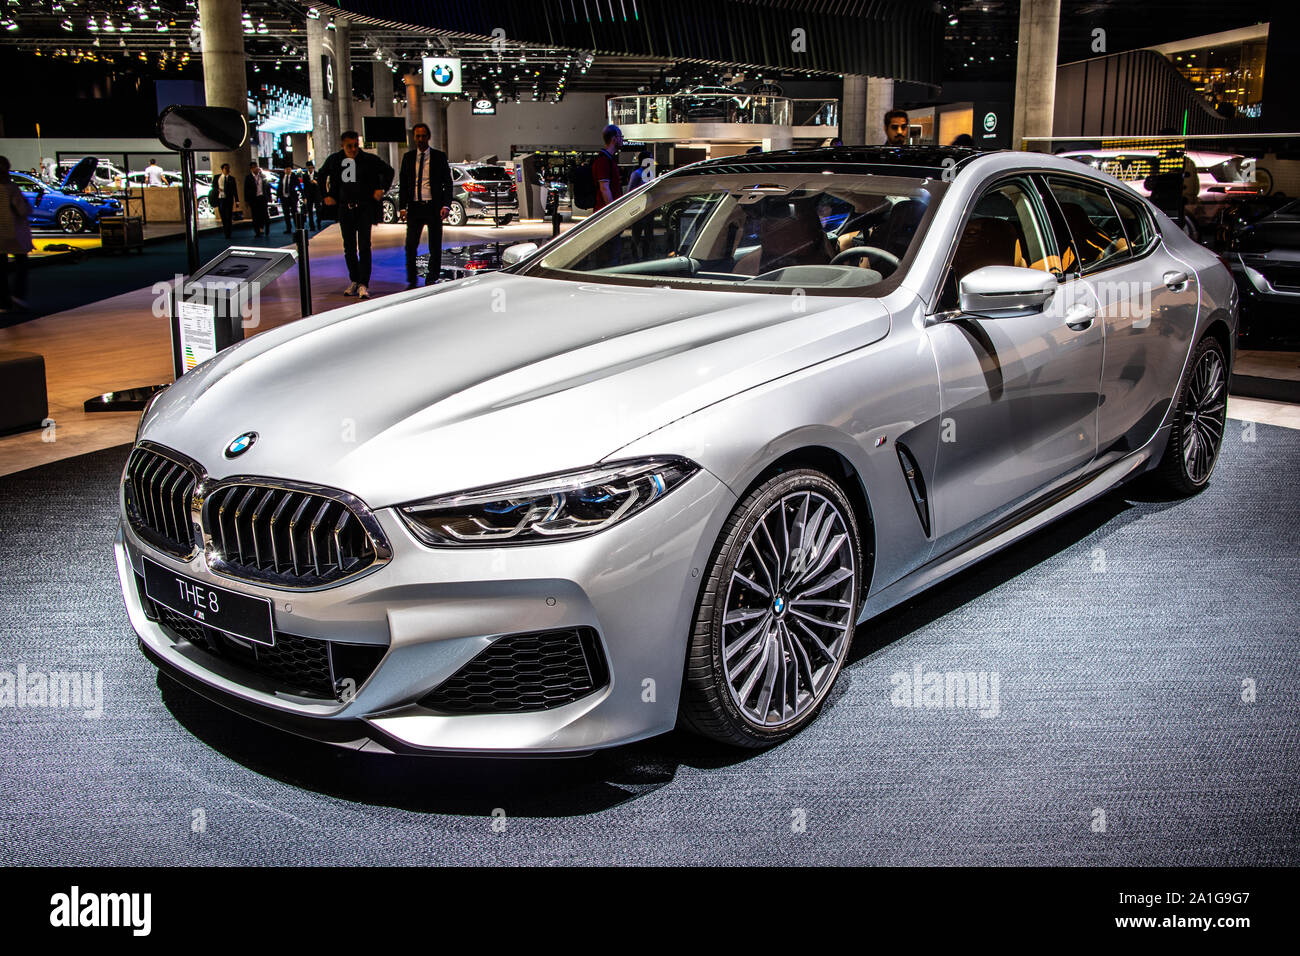 Frankfurt Germany Sep 19 Bmw 8 Series M850i Xdrive At Iaa 2nd Gen G16 Model Year 8 Class Four Door Gran Coupe Sports Car Built By Bmw Stock Photo Alamy